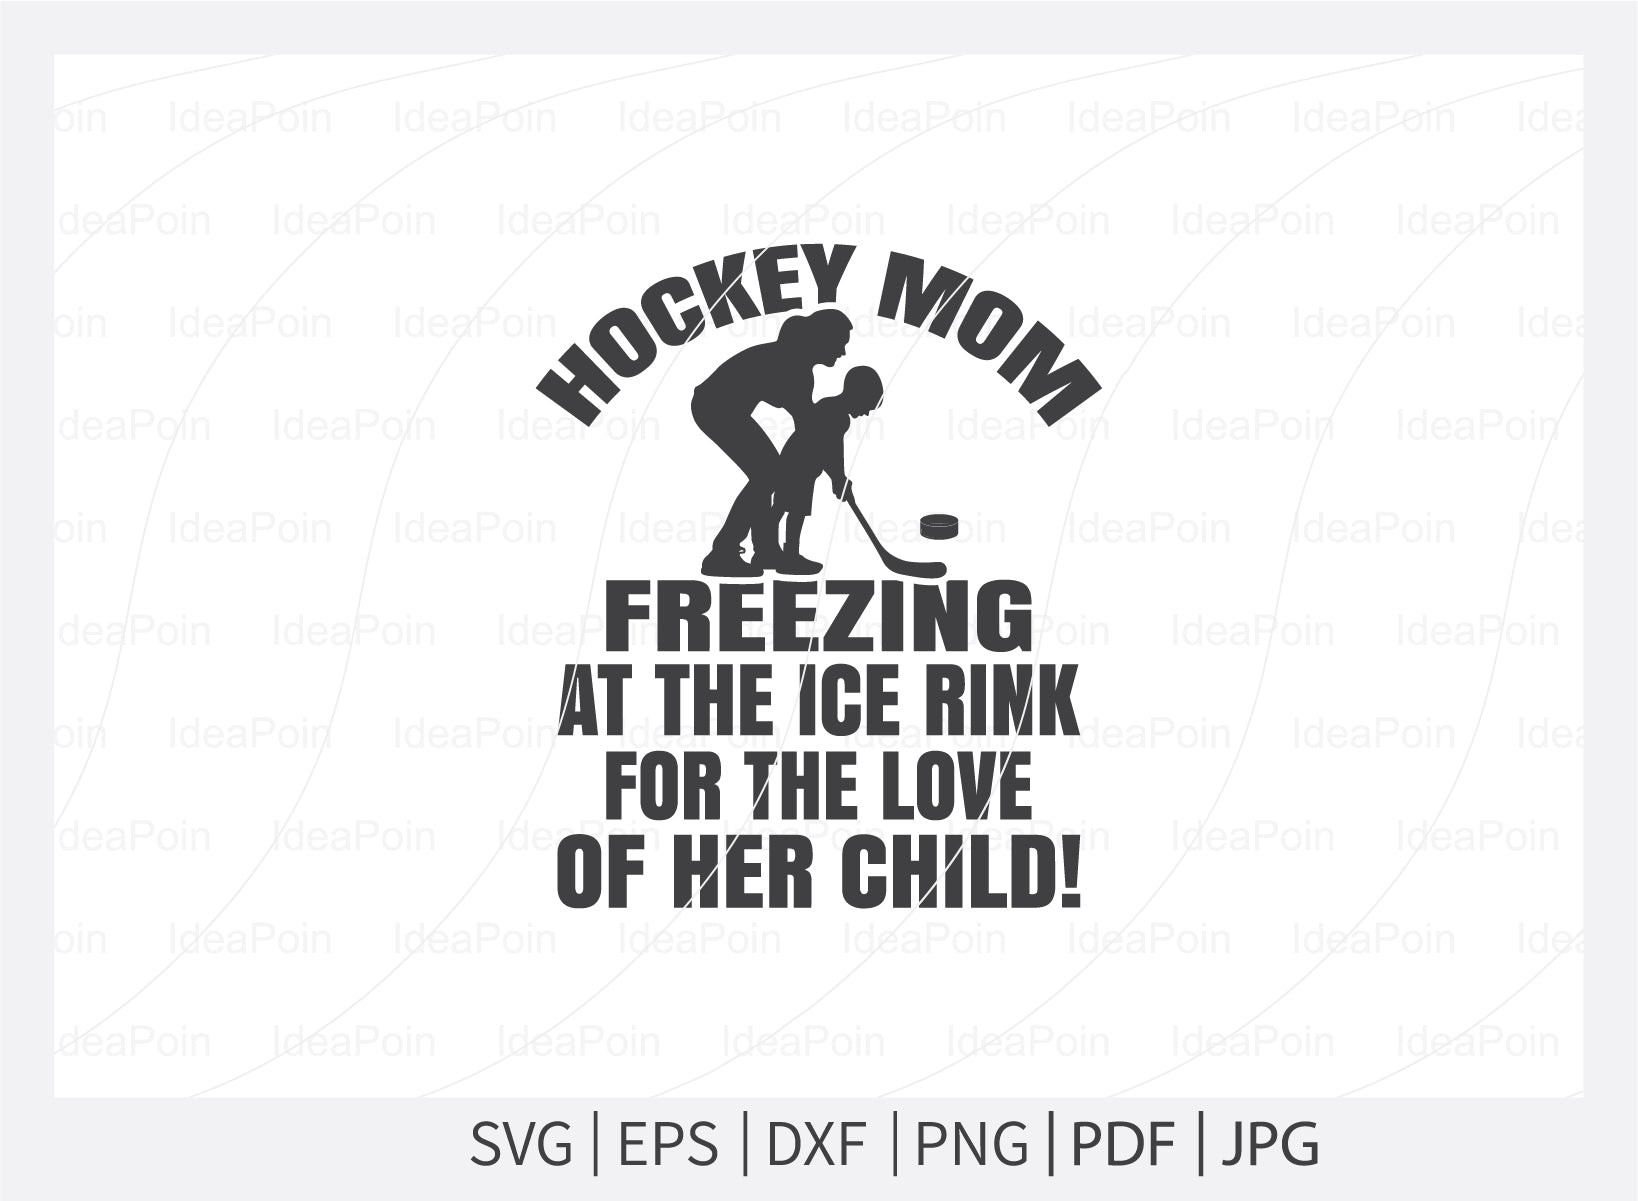 Hockey mom freezing at the ice rink for the love of her child Svg, Ice Hockey SVG, Hockey Quotes Svg, Lets Watch Ice Hockey, Hockey Player, Hockey life clip art, Cut Files